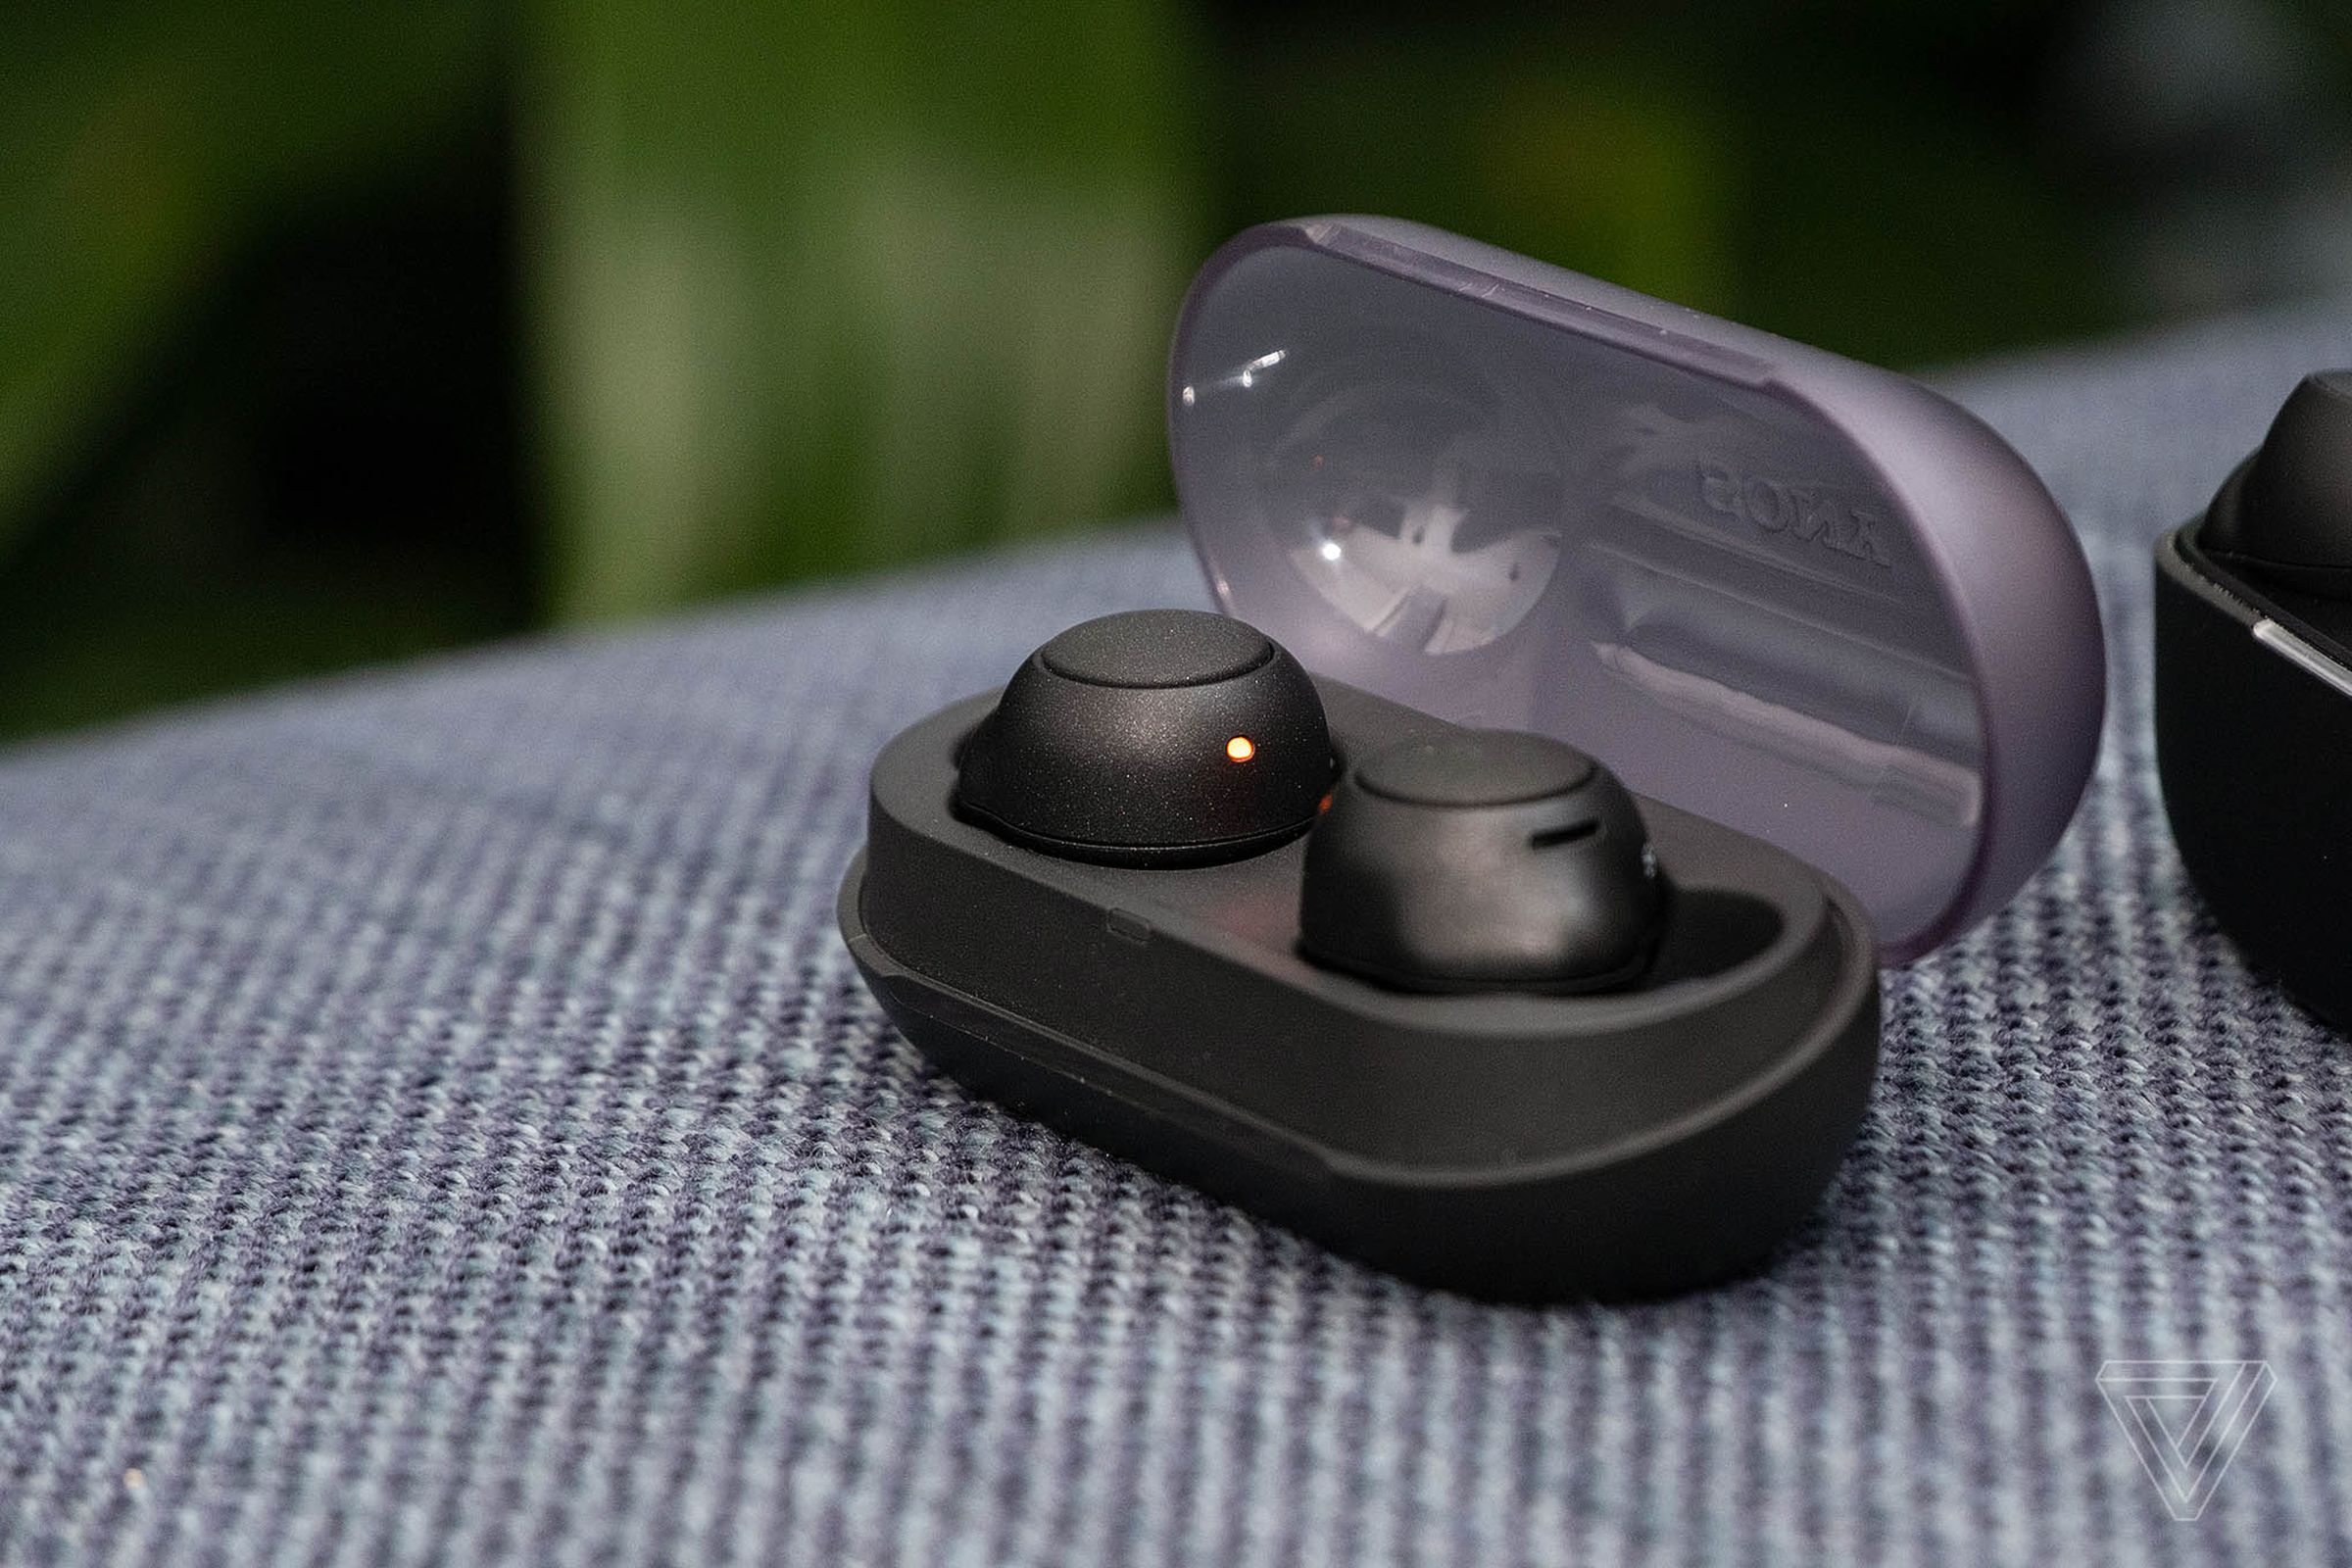 The case lid lets you easily see when the earbuds are charging.